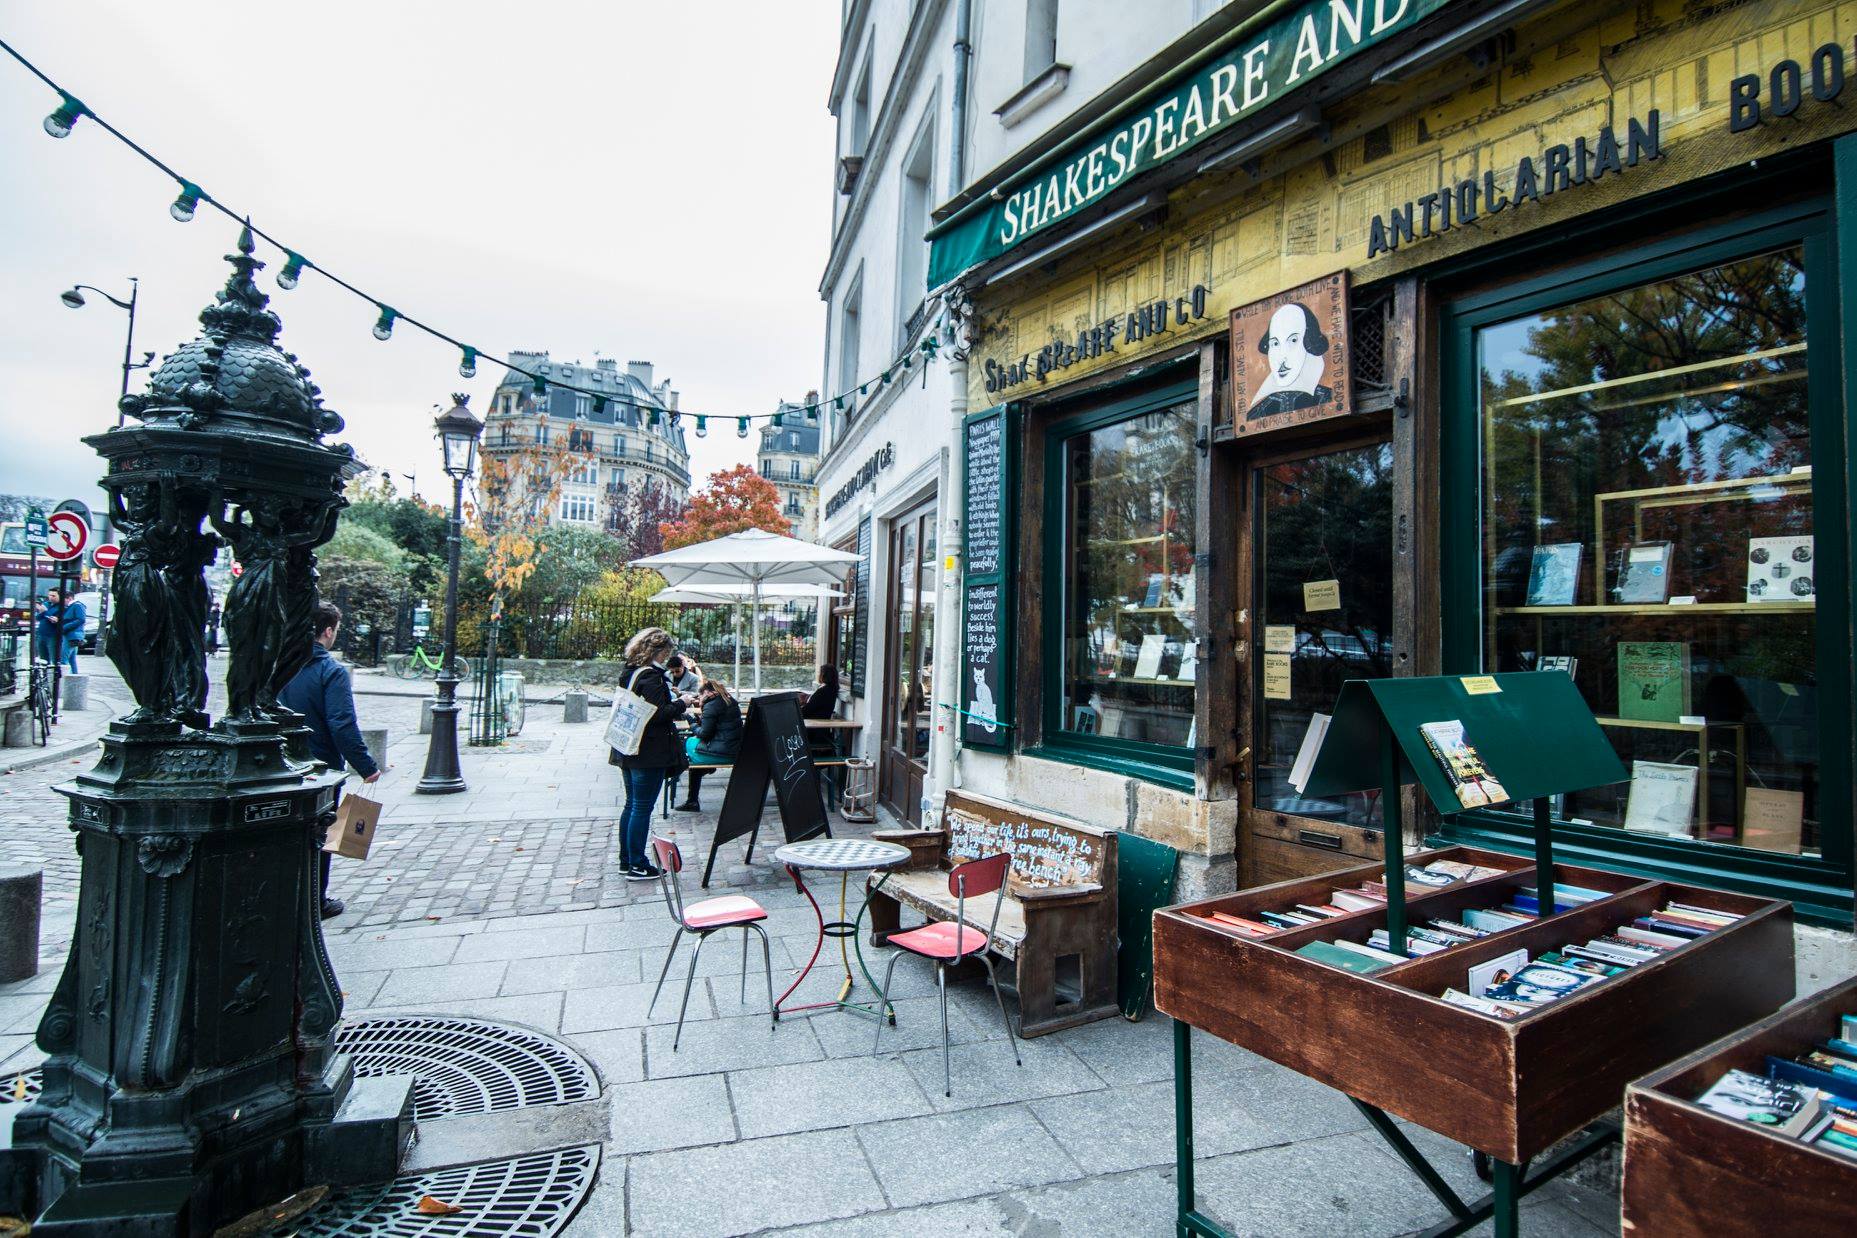 Shakespeare and Company a stunningly luxurious bookstore